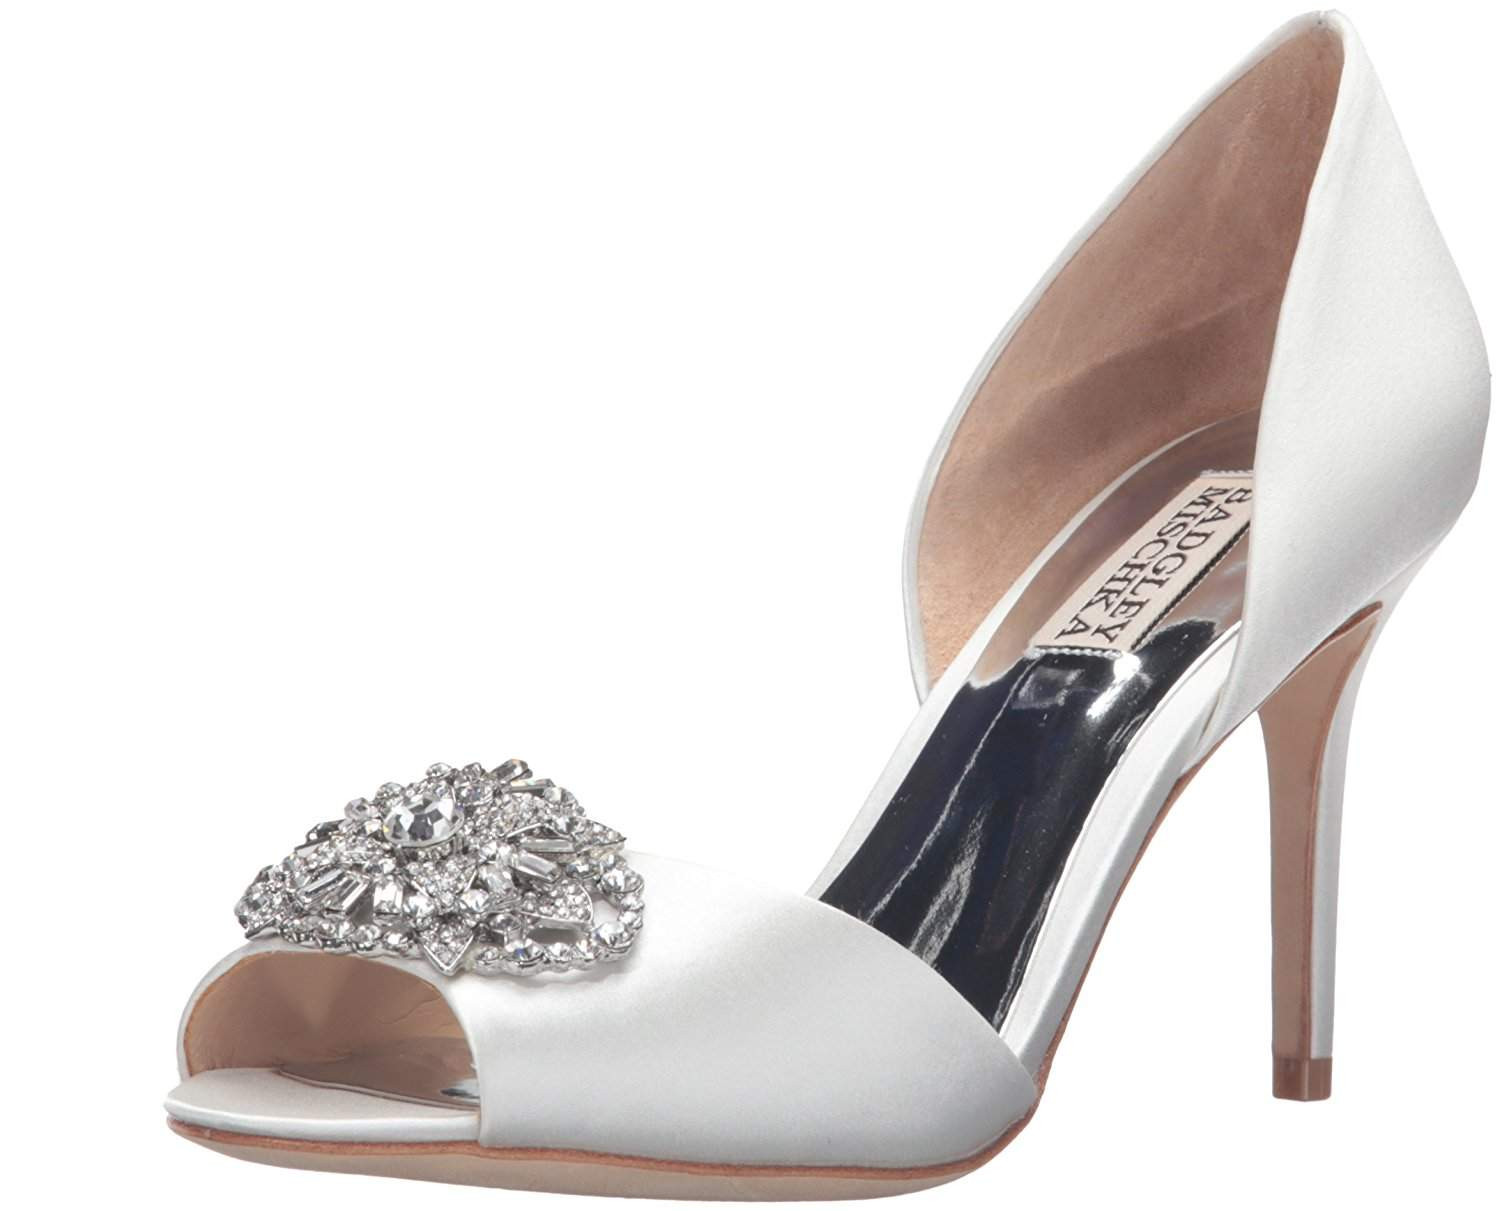 Wedding Shoes For The Bride
 Top 50 Best Bridal Shoes in 2018 for Every Bud & Style